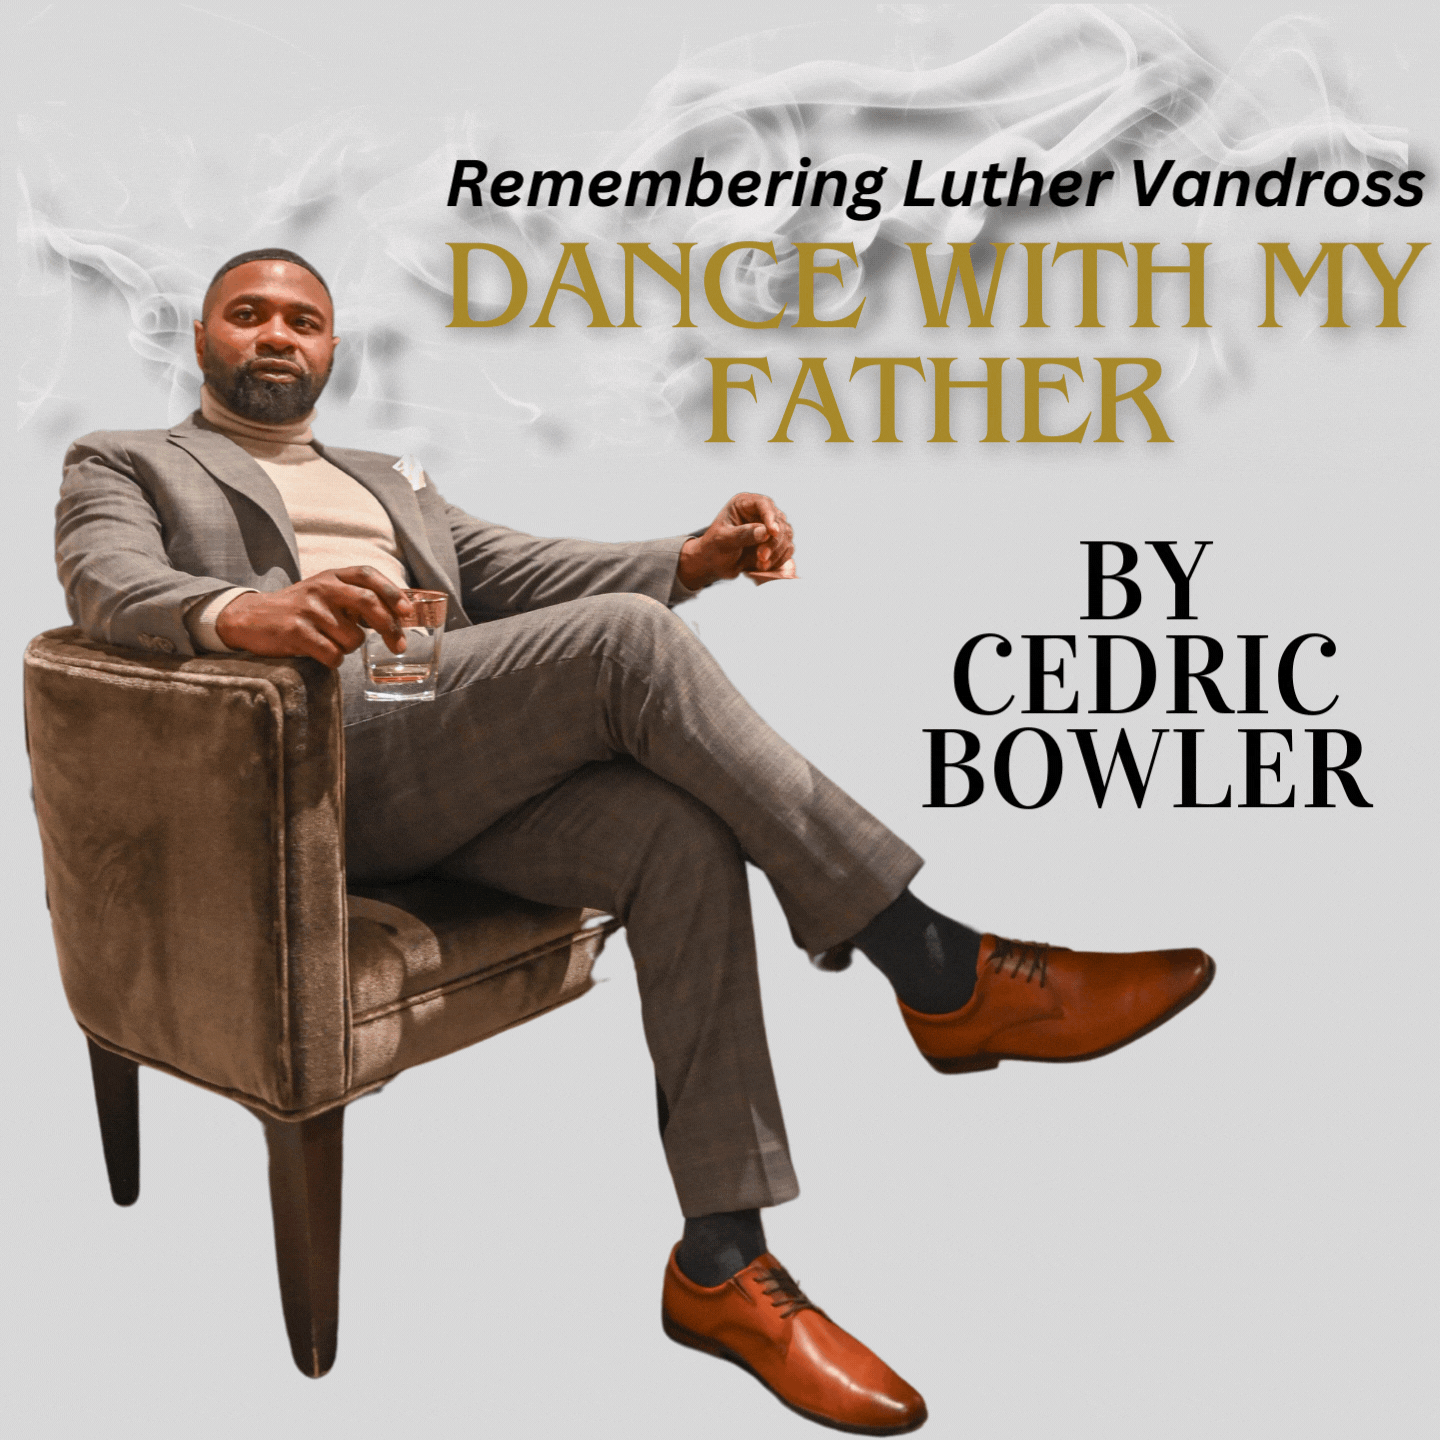 Remembering Luther Vandross by Cedric Bowler- “DANCE WITH MY FATHER”